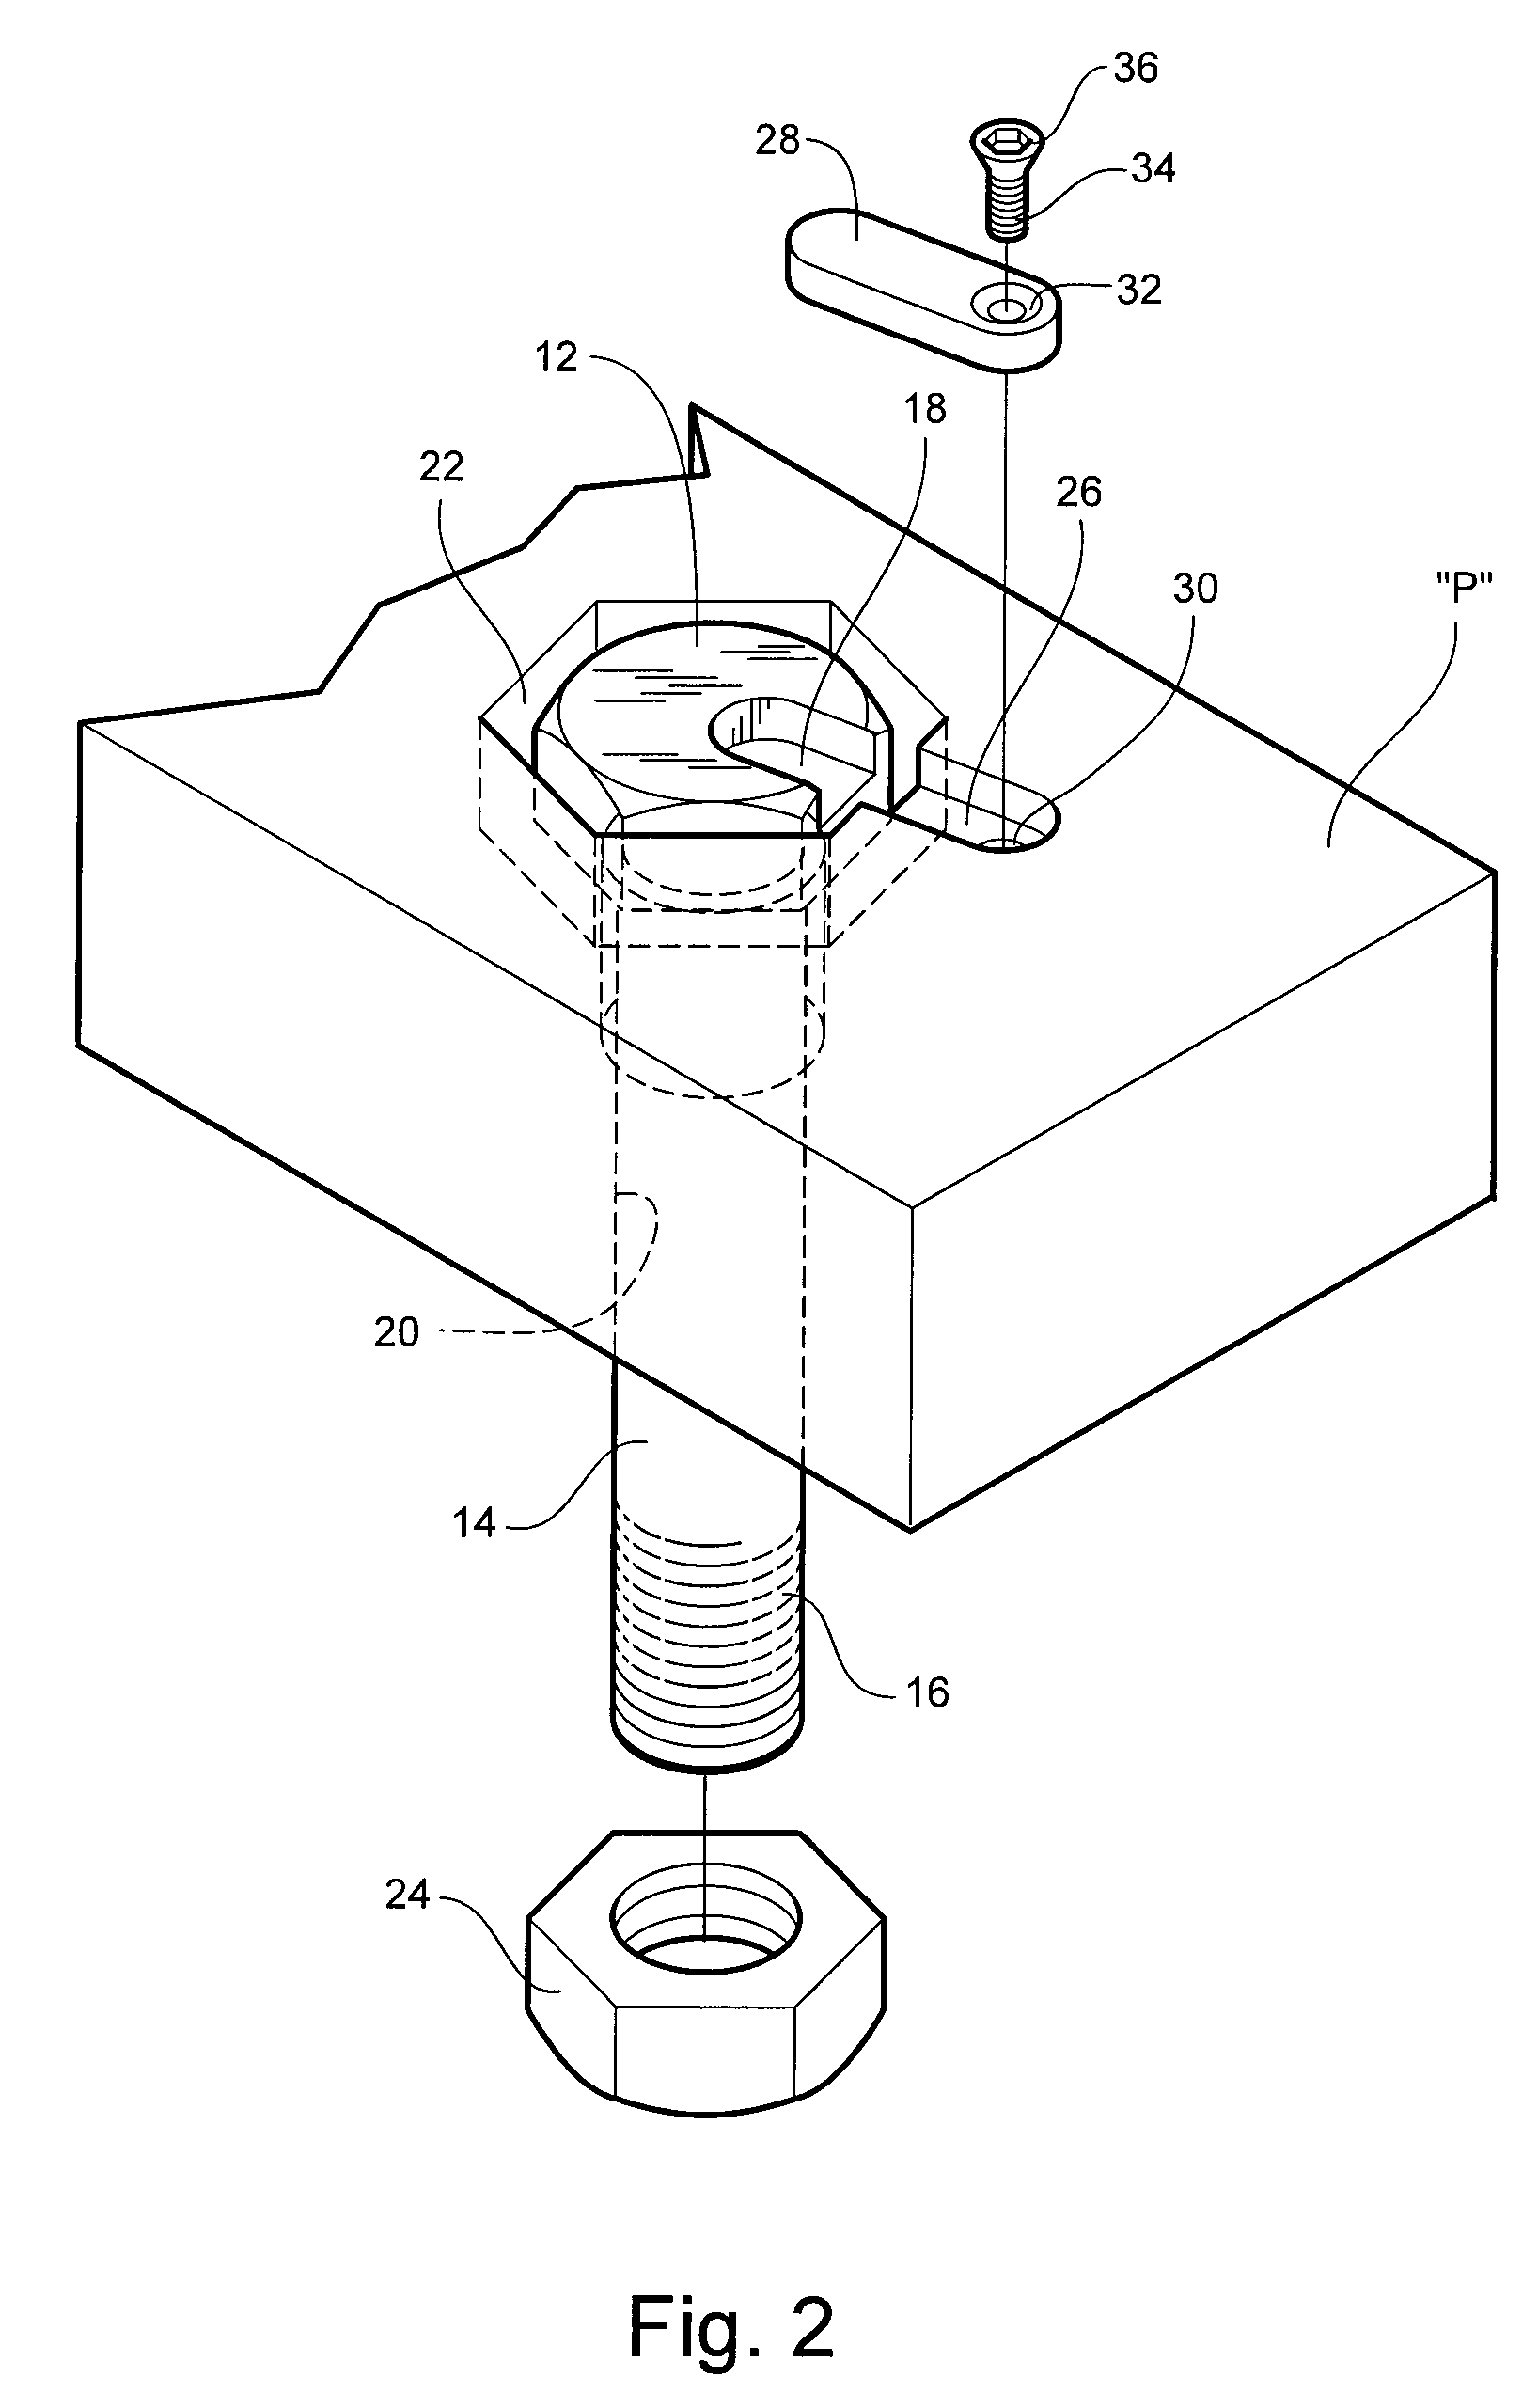 Fastener system, fastener system article, and method